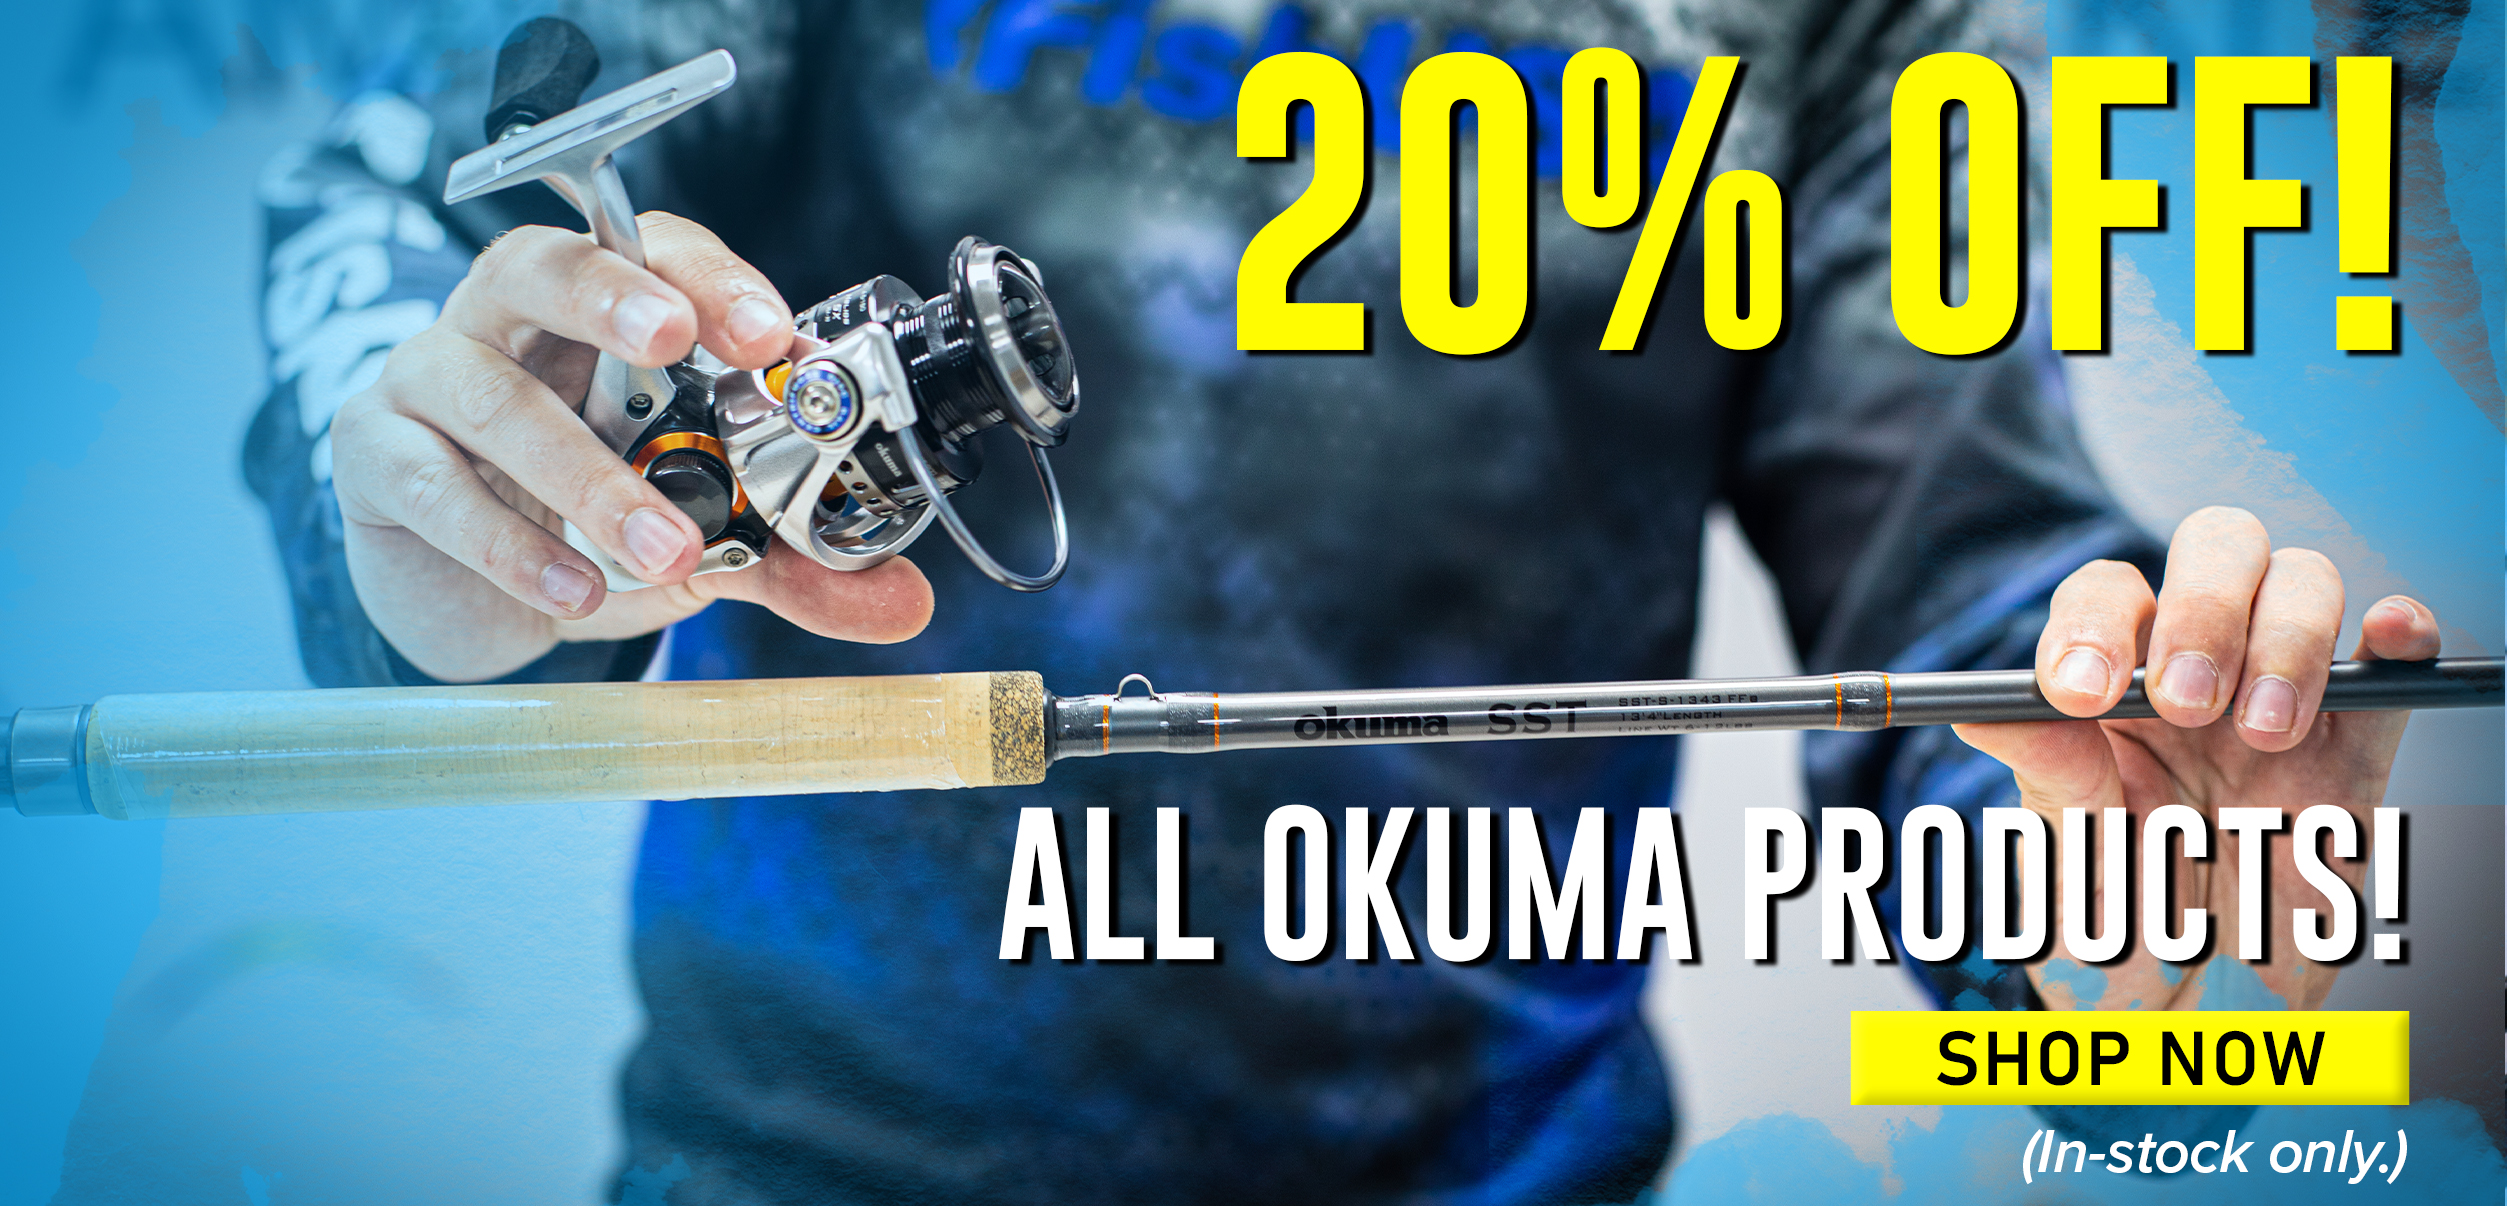 20% Off All Okuma Products Shop Now (In-stock only.)